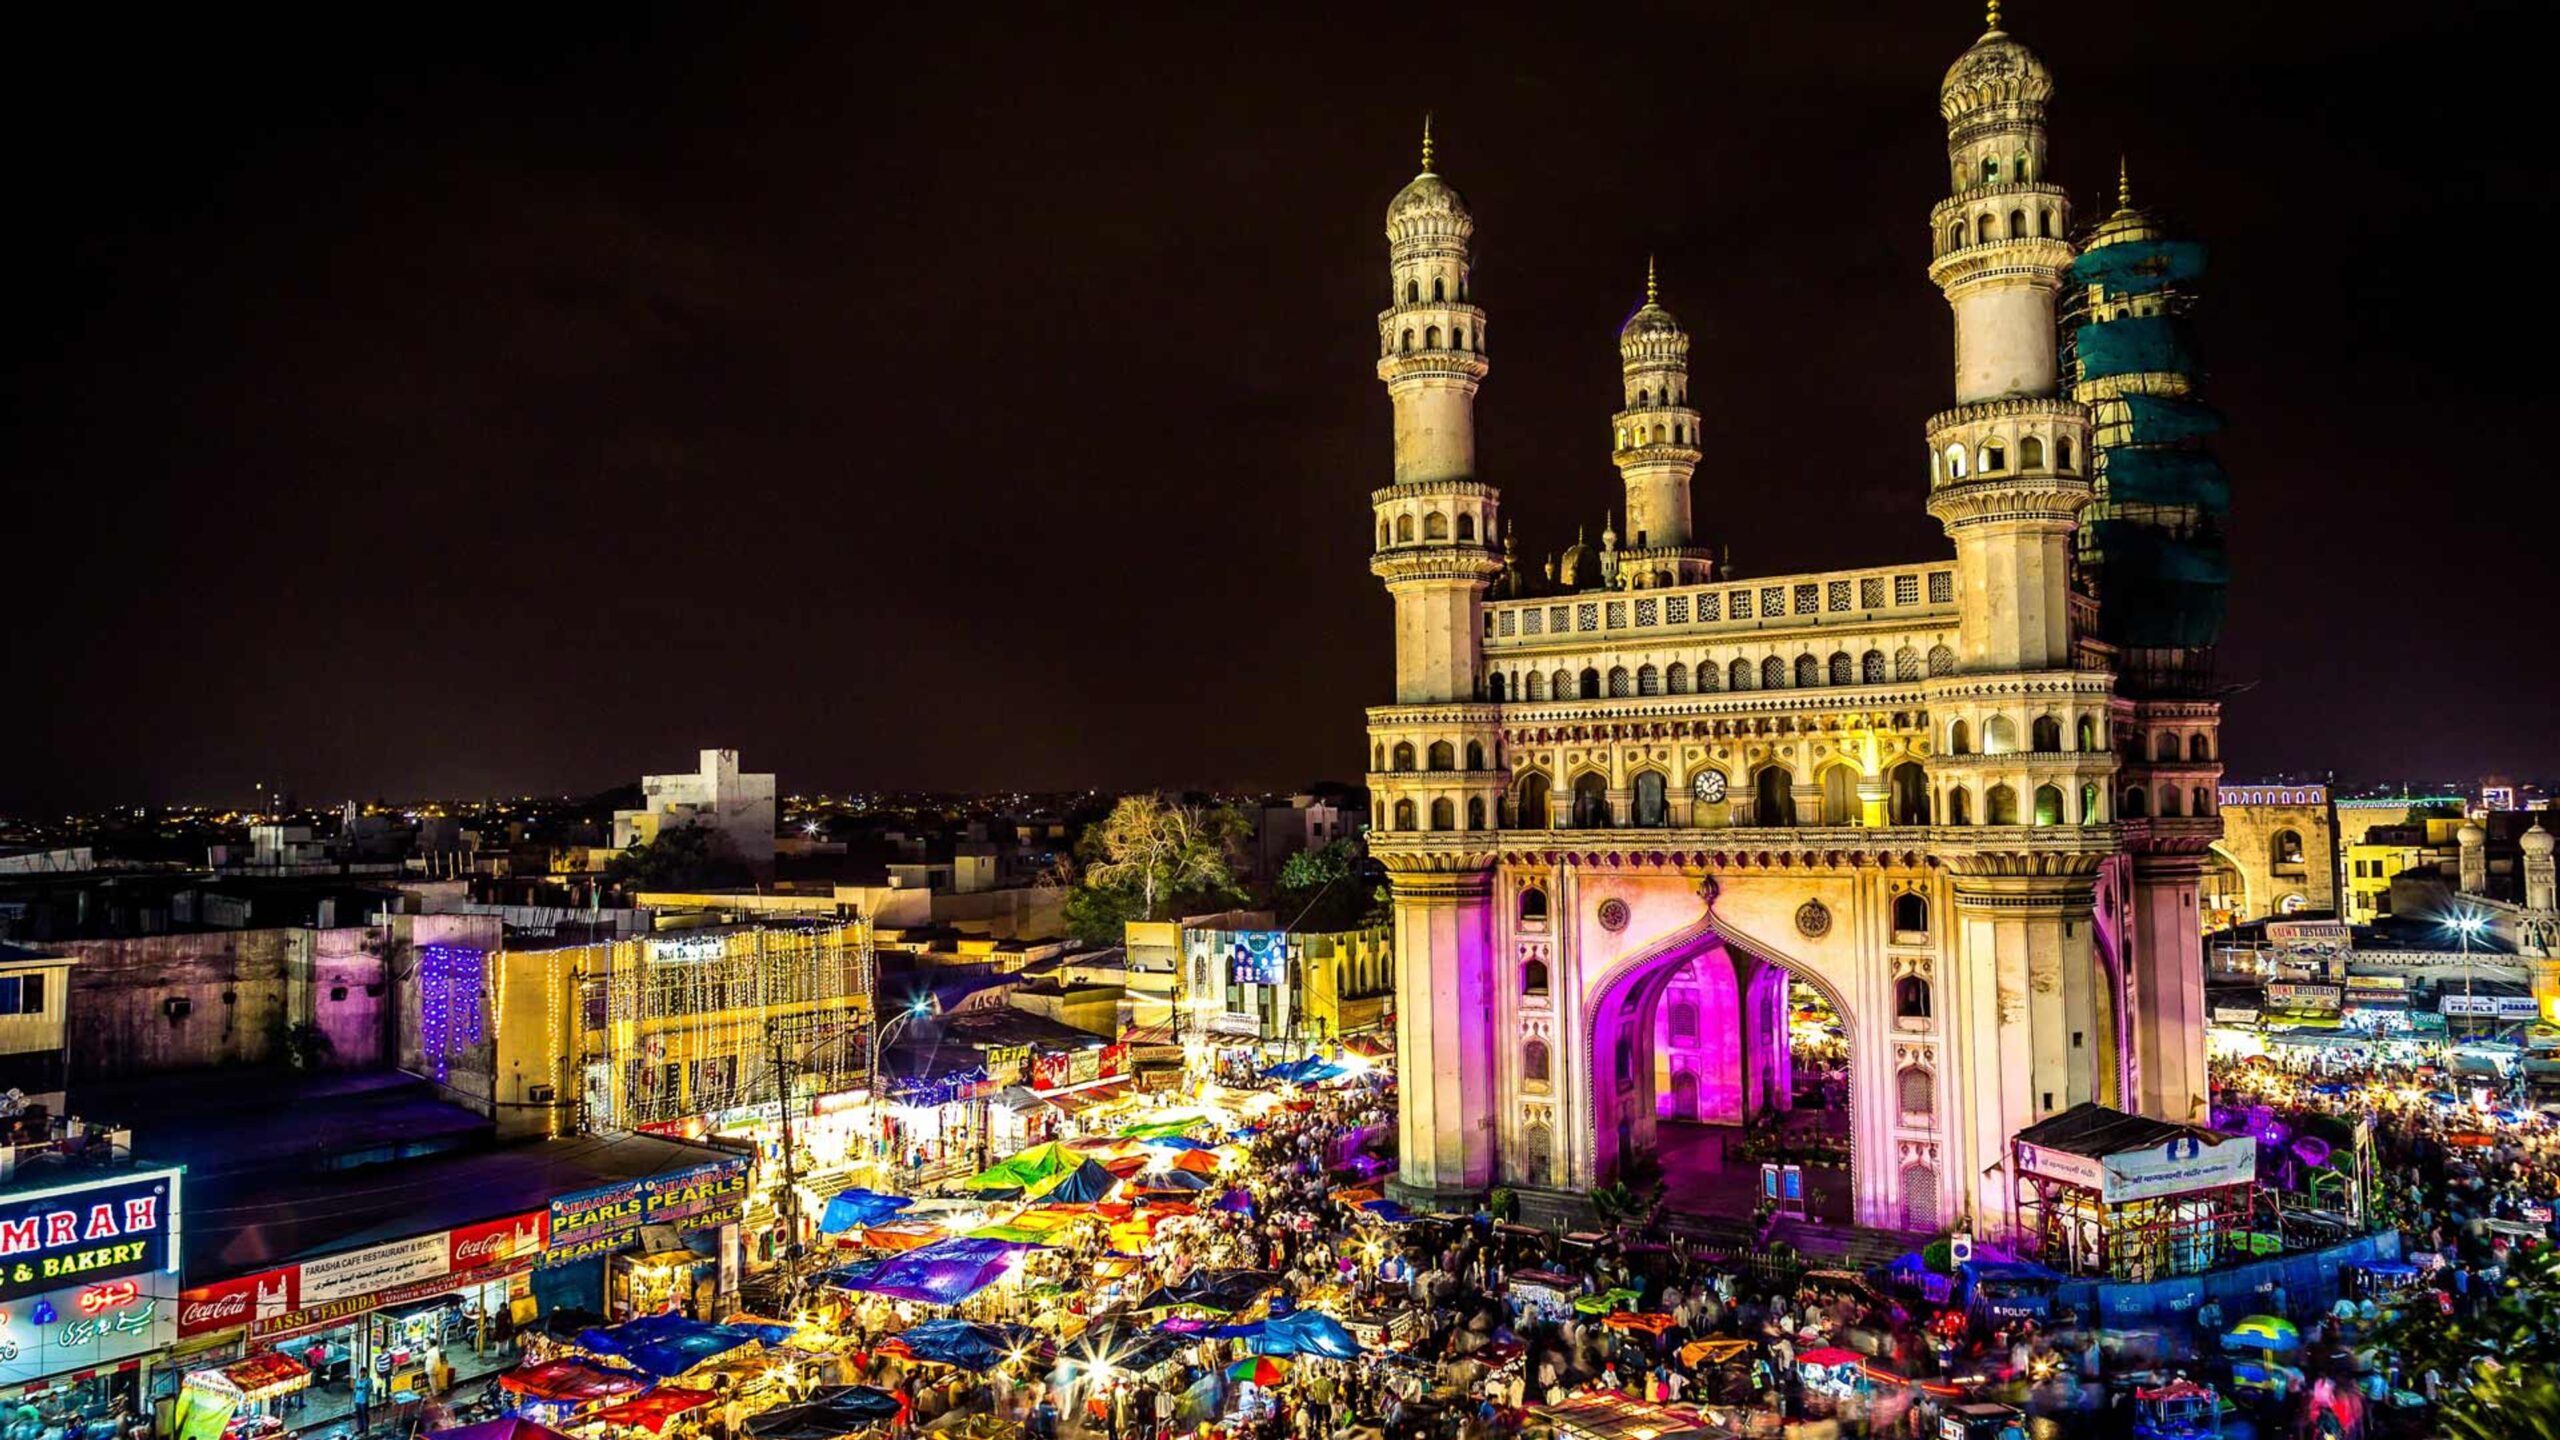 Best Historical Places In Hyderabad